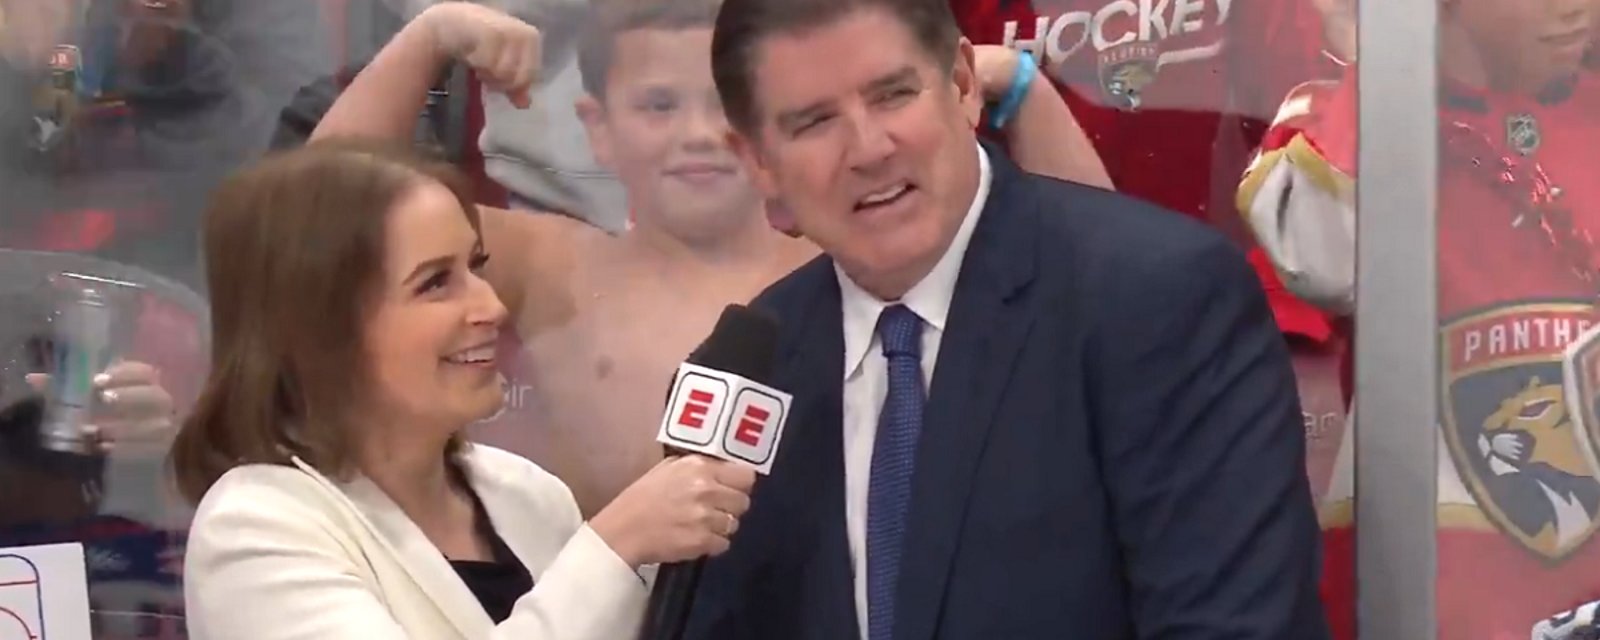 Peter Laviolette chirps little kid on camera in Game 6.